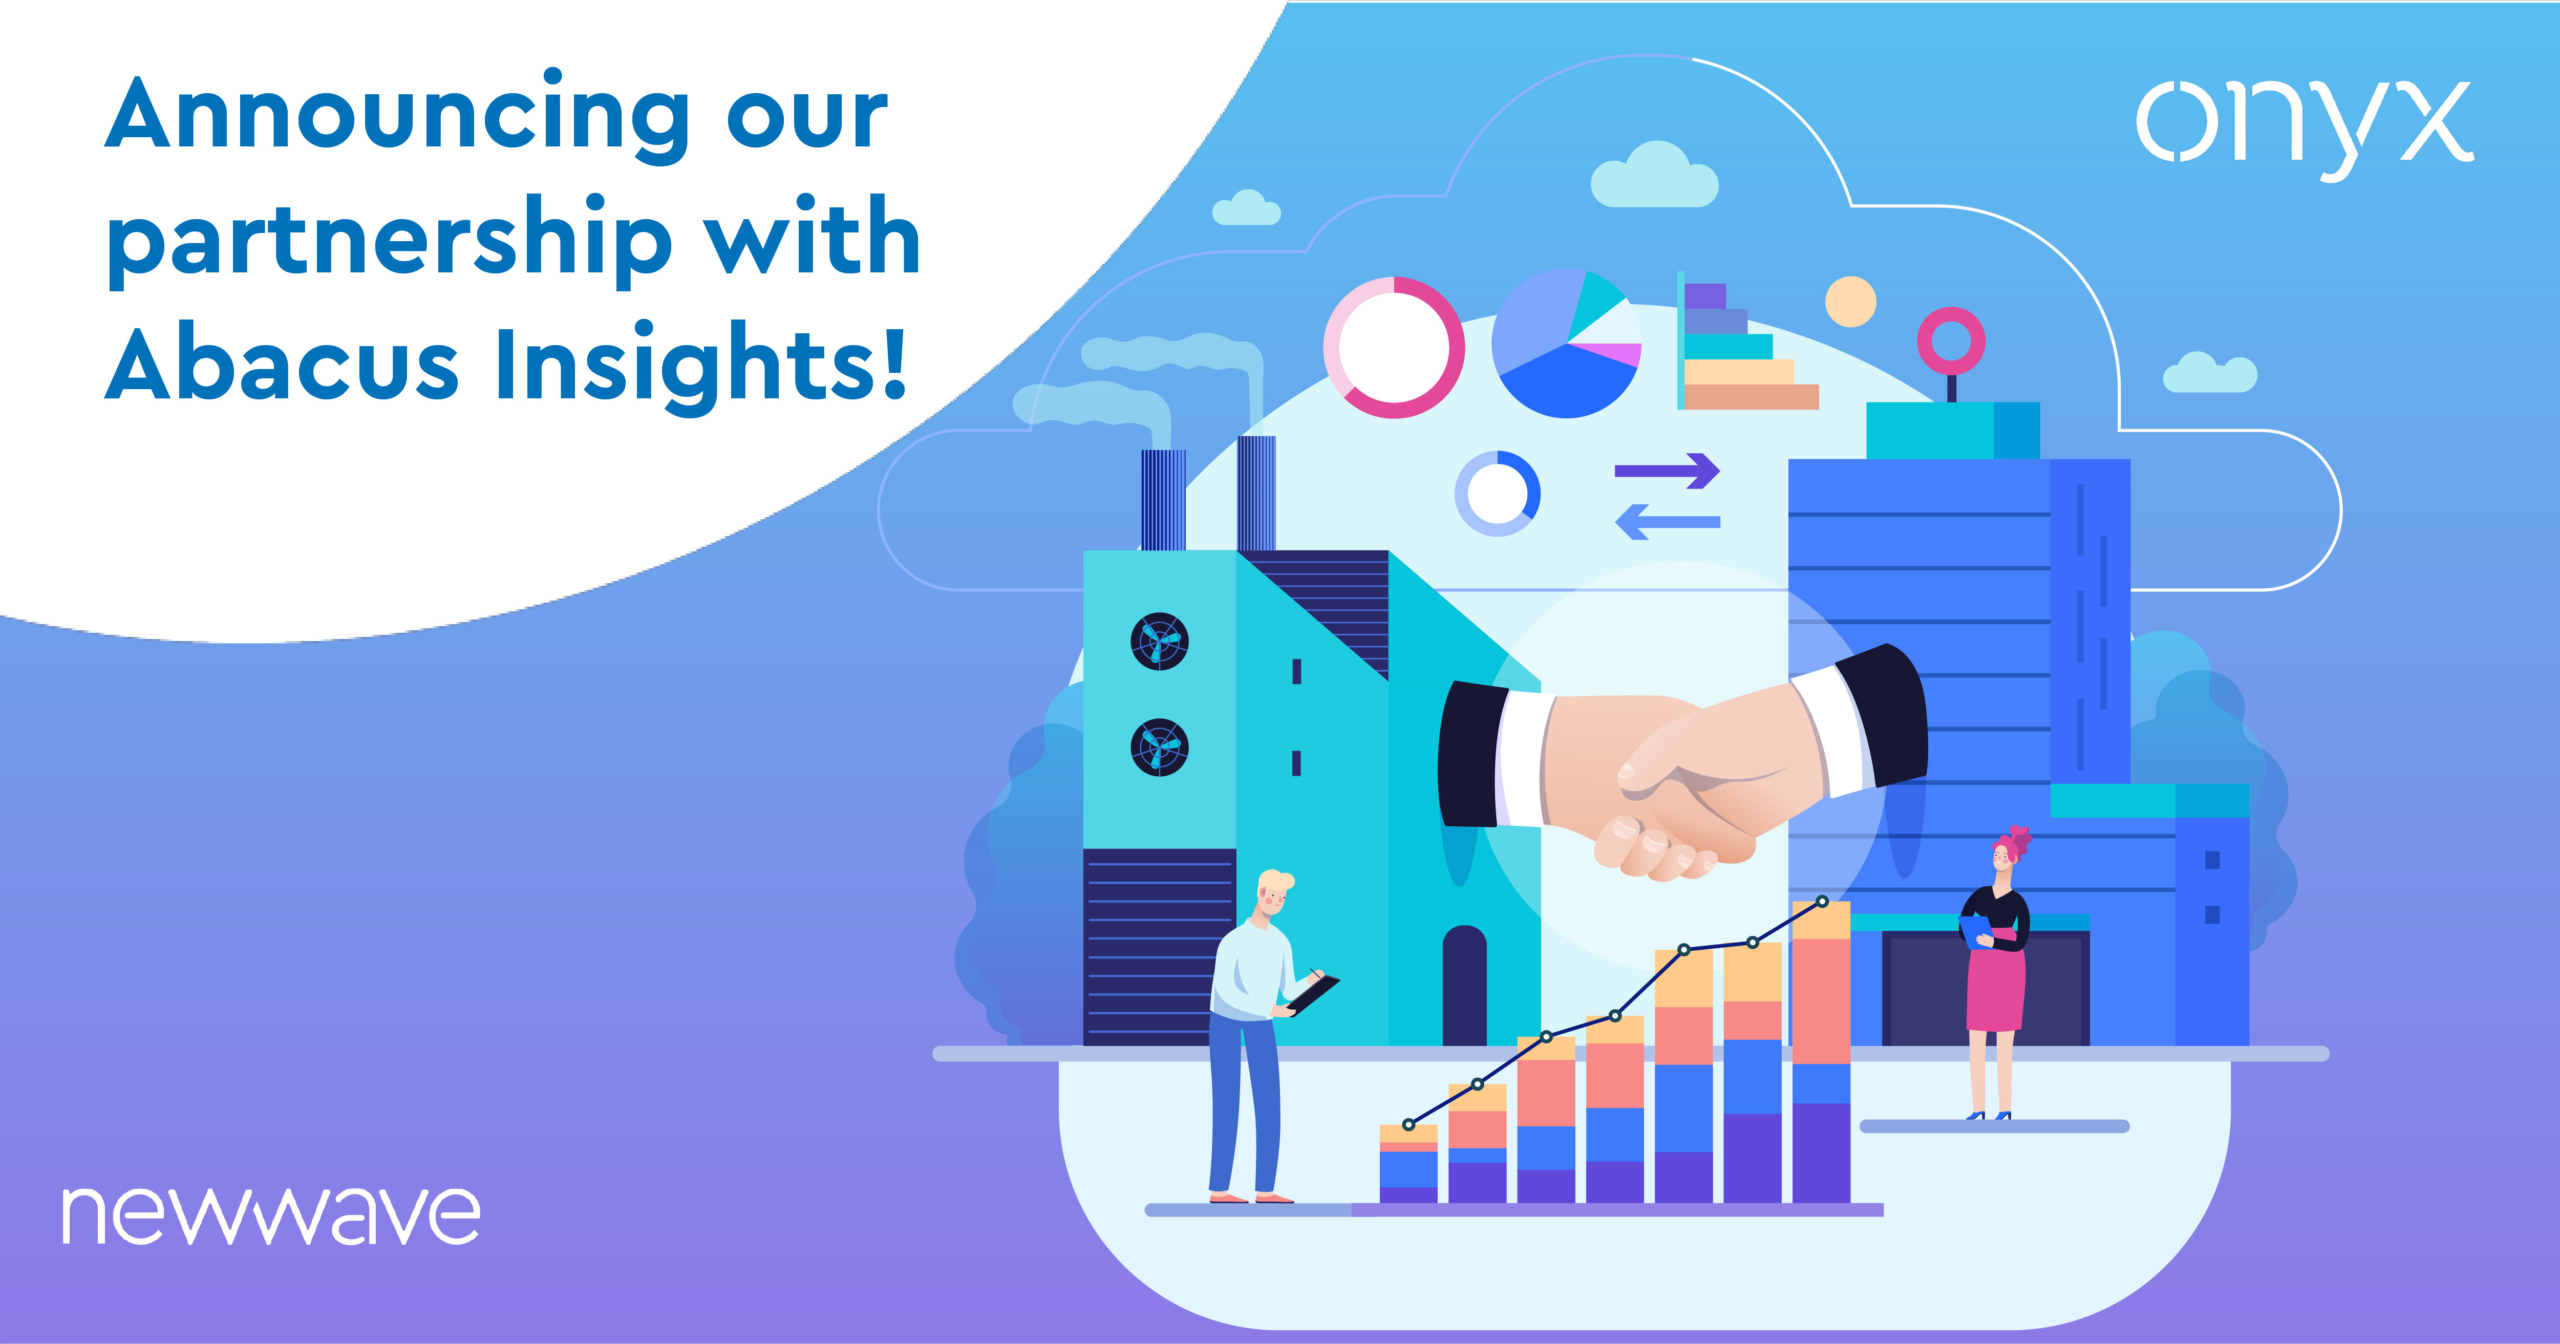 Onyx Paternership with Abacus Insights